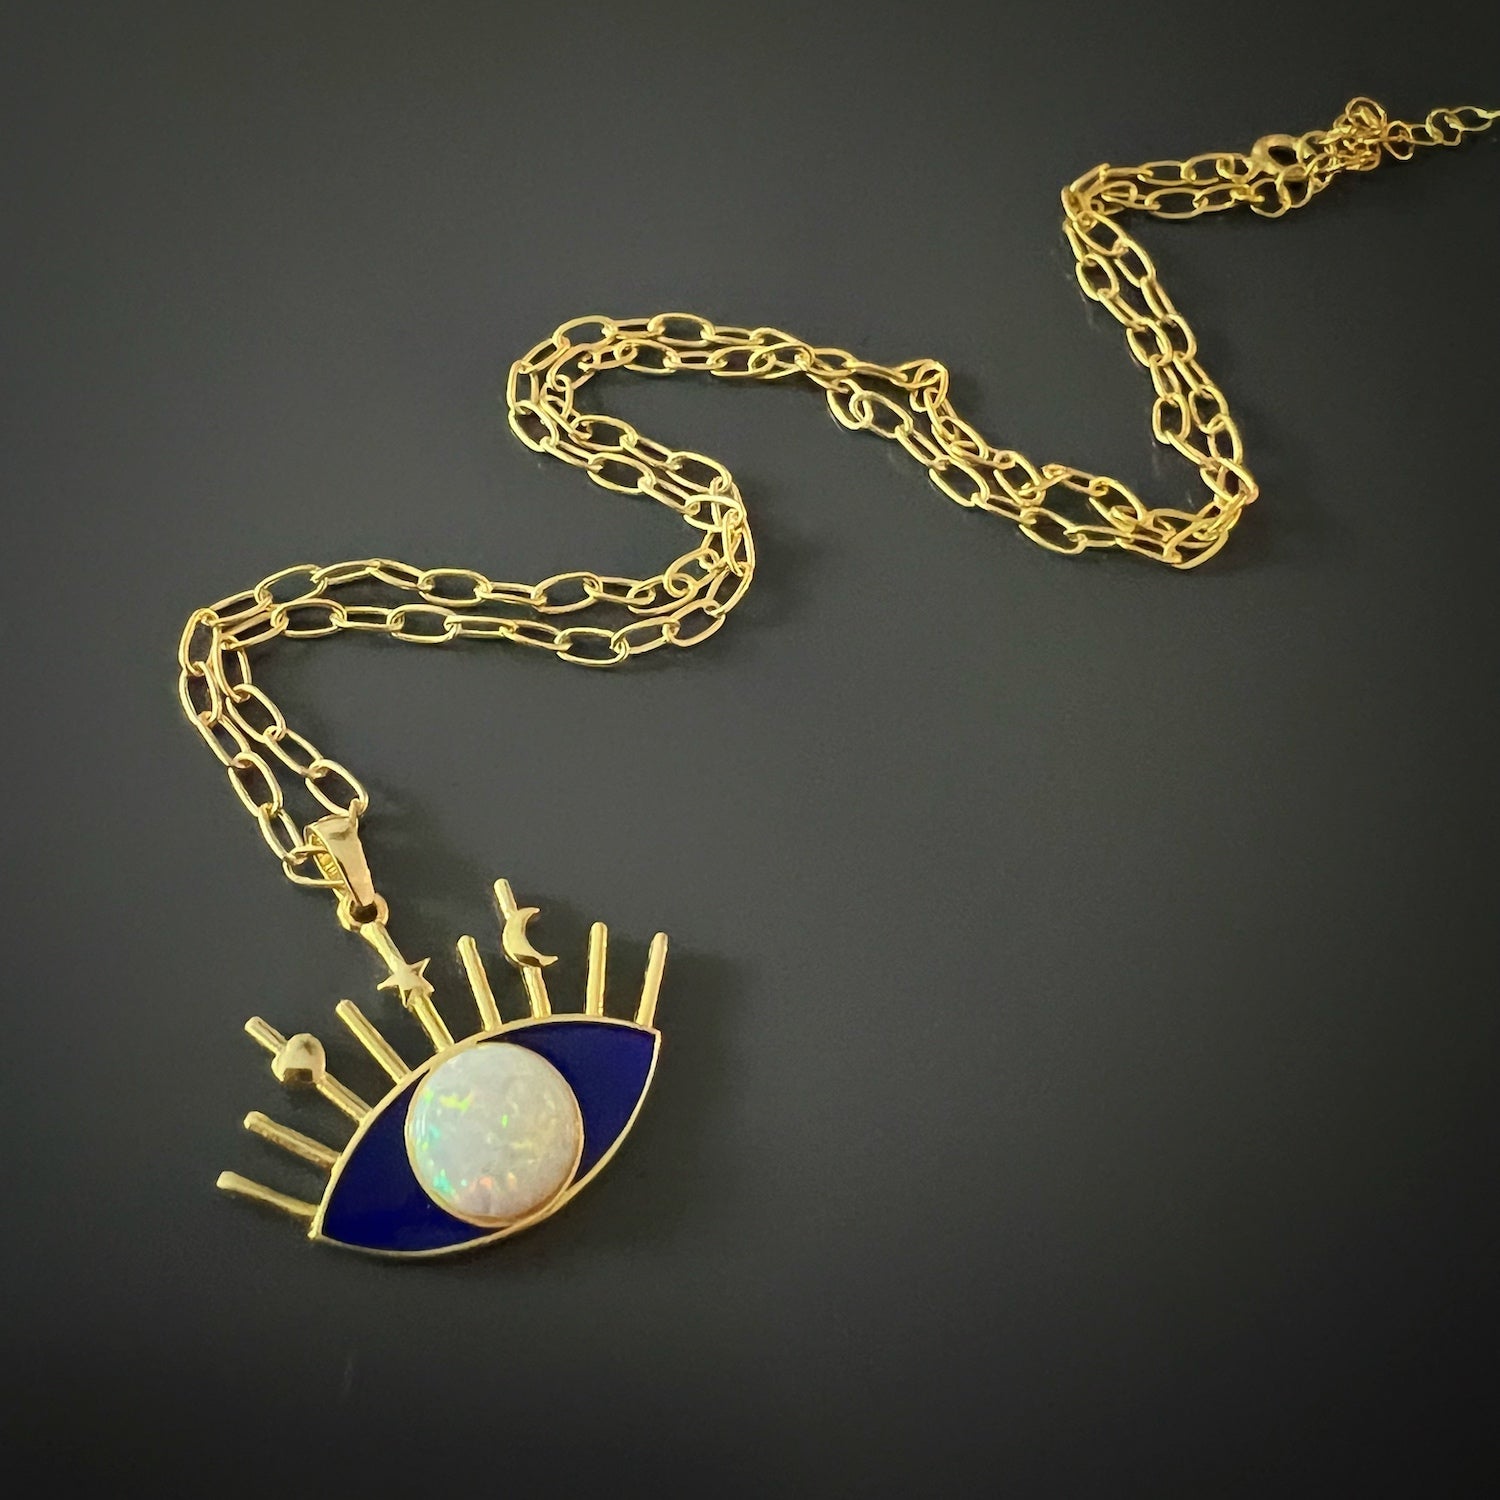 The Opal Blue Evil Eye Necklace, a unique accessory that embodies spirituality and beauty.